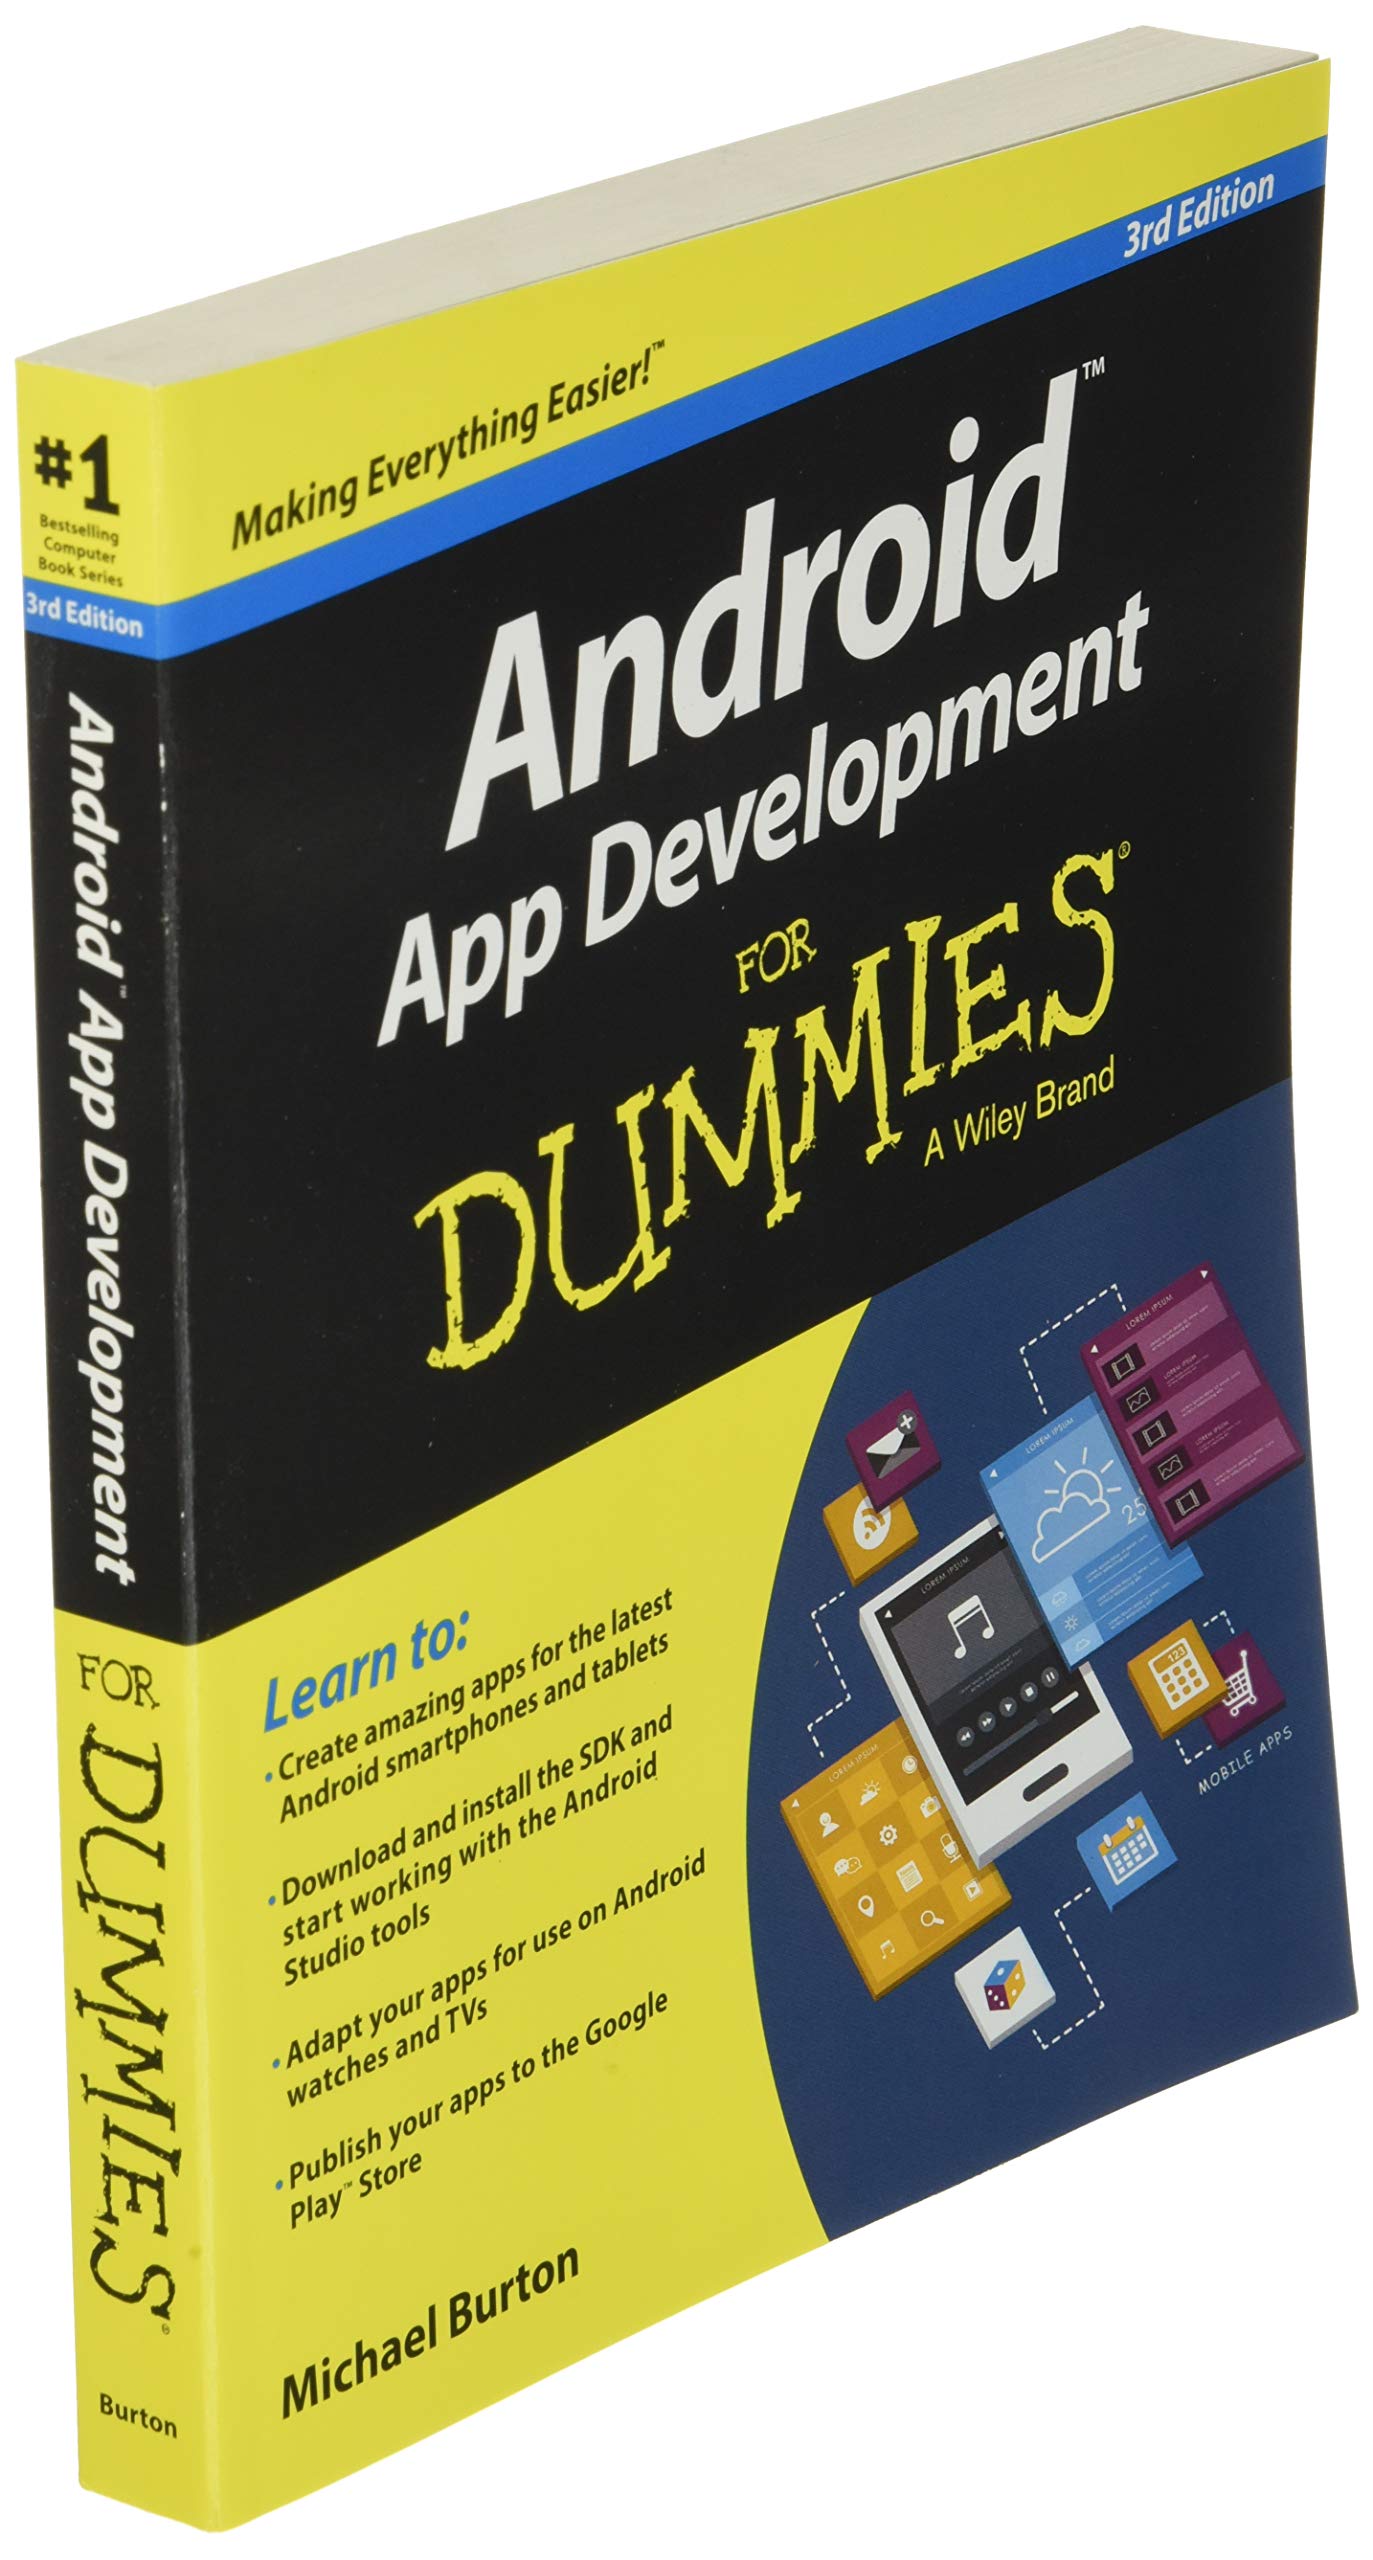 Android App Development For Dummies